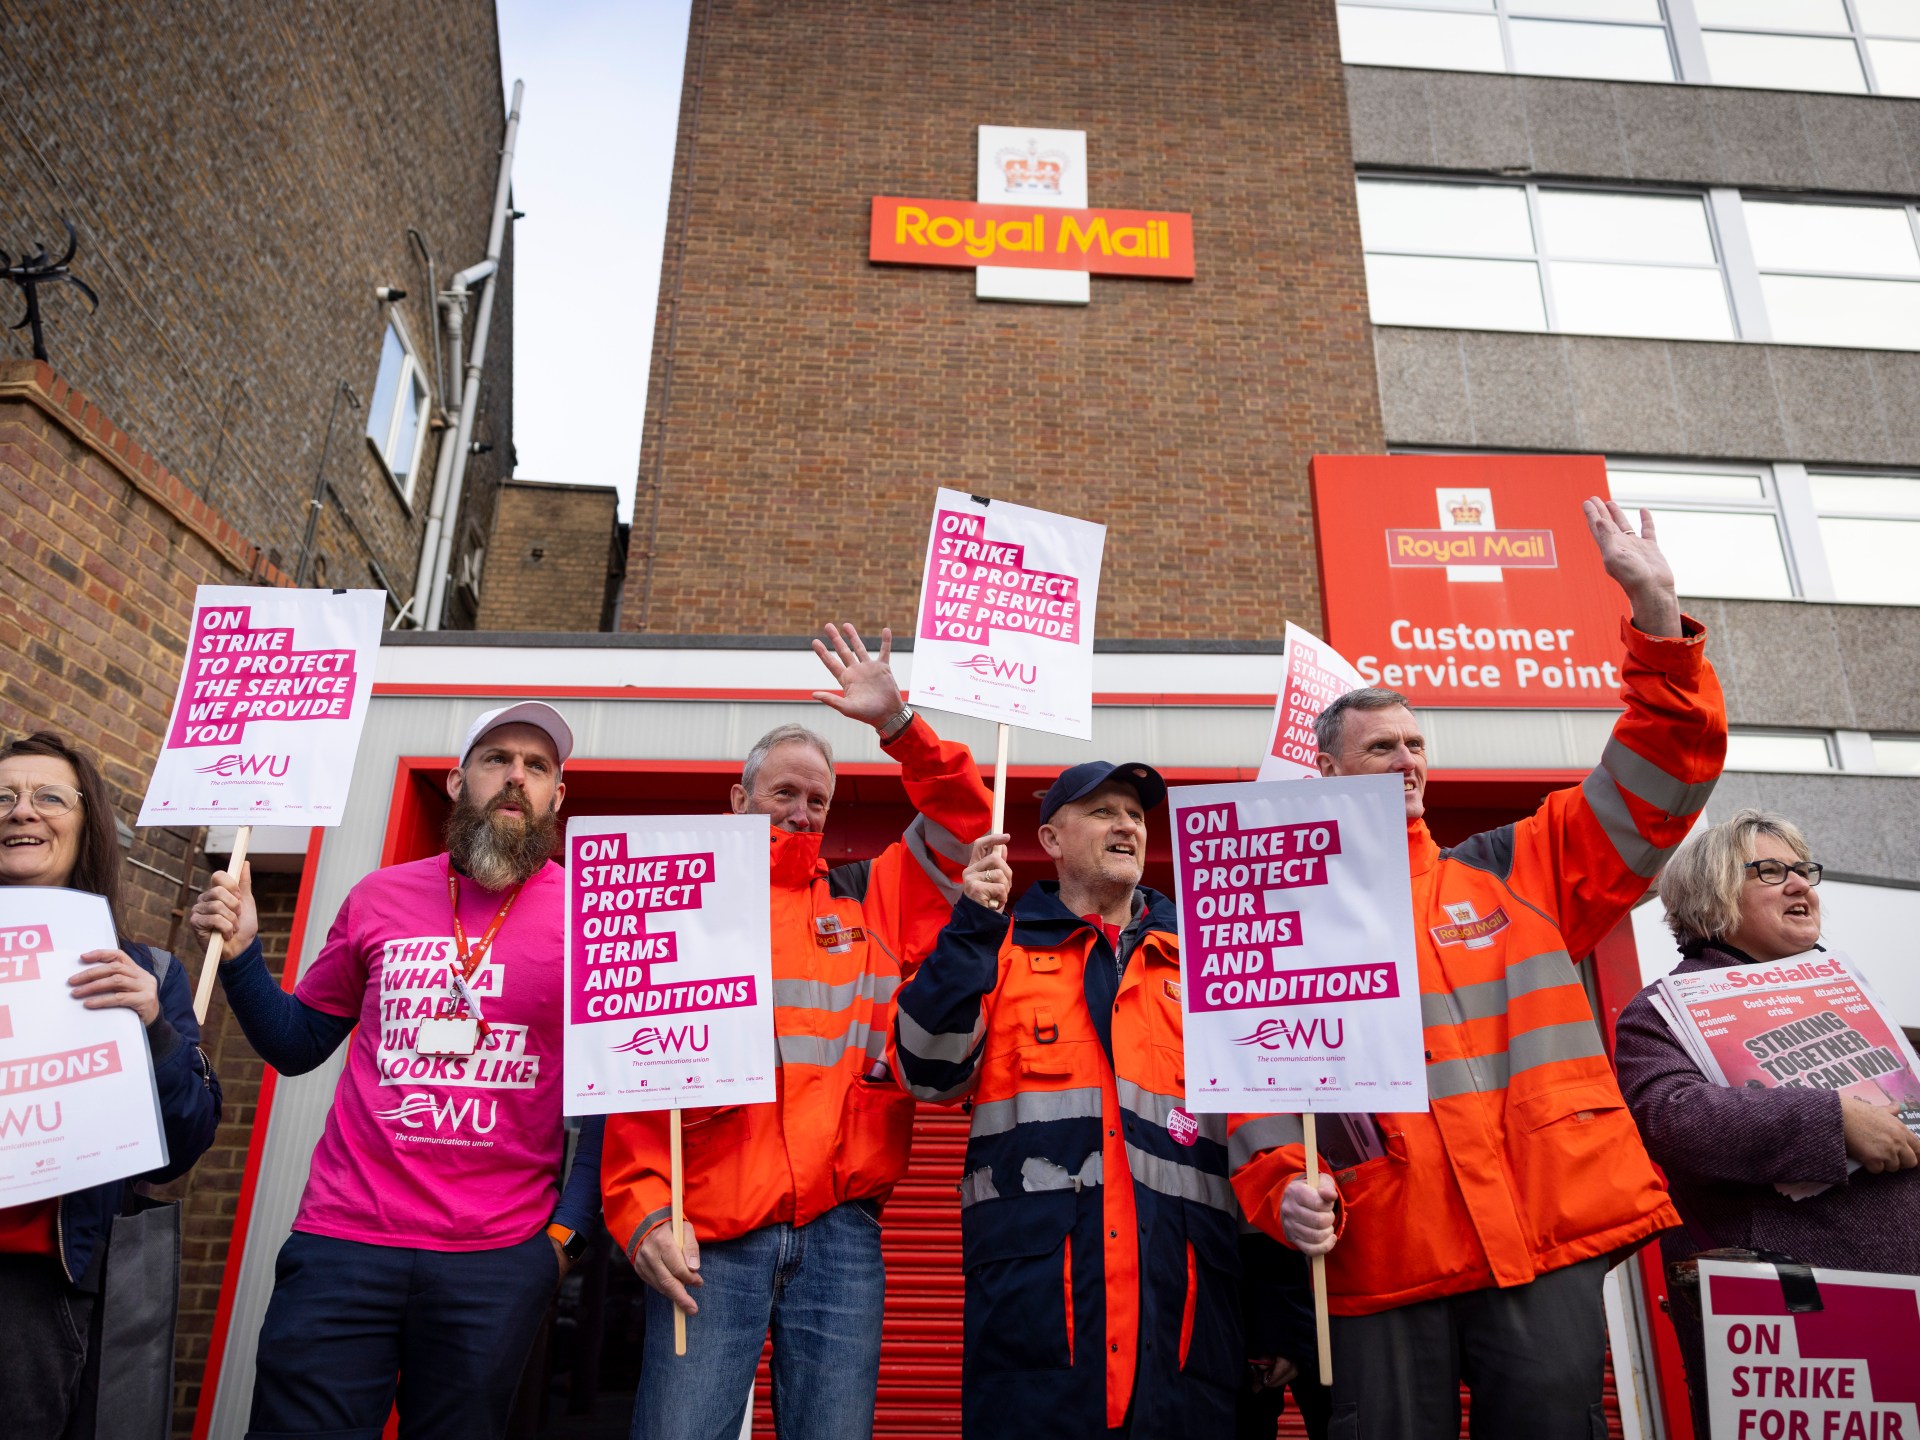 Thousands of UK’s Royal Mail workers launch 48-hour strike